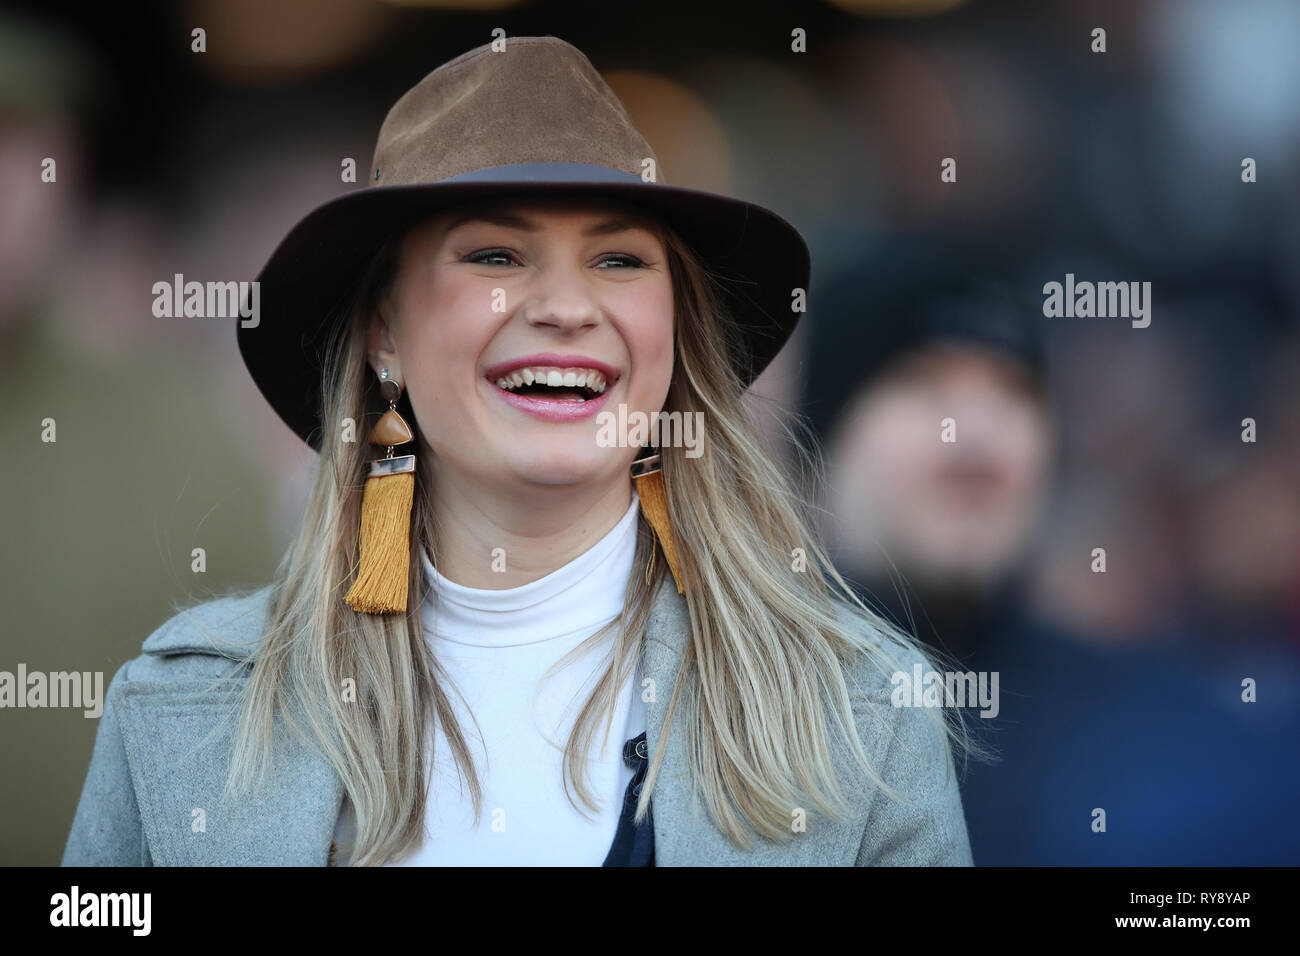 A racegoer watches a horse race during Champion Day of the 2019 Cheltenham Festival at Cheltenham Racecourse. Stock Photo